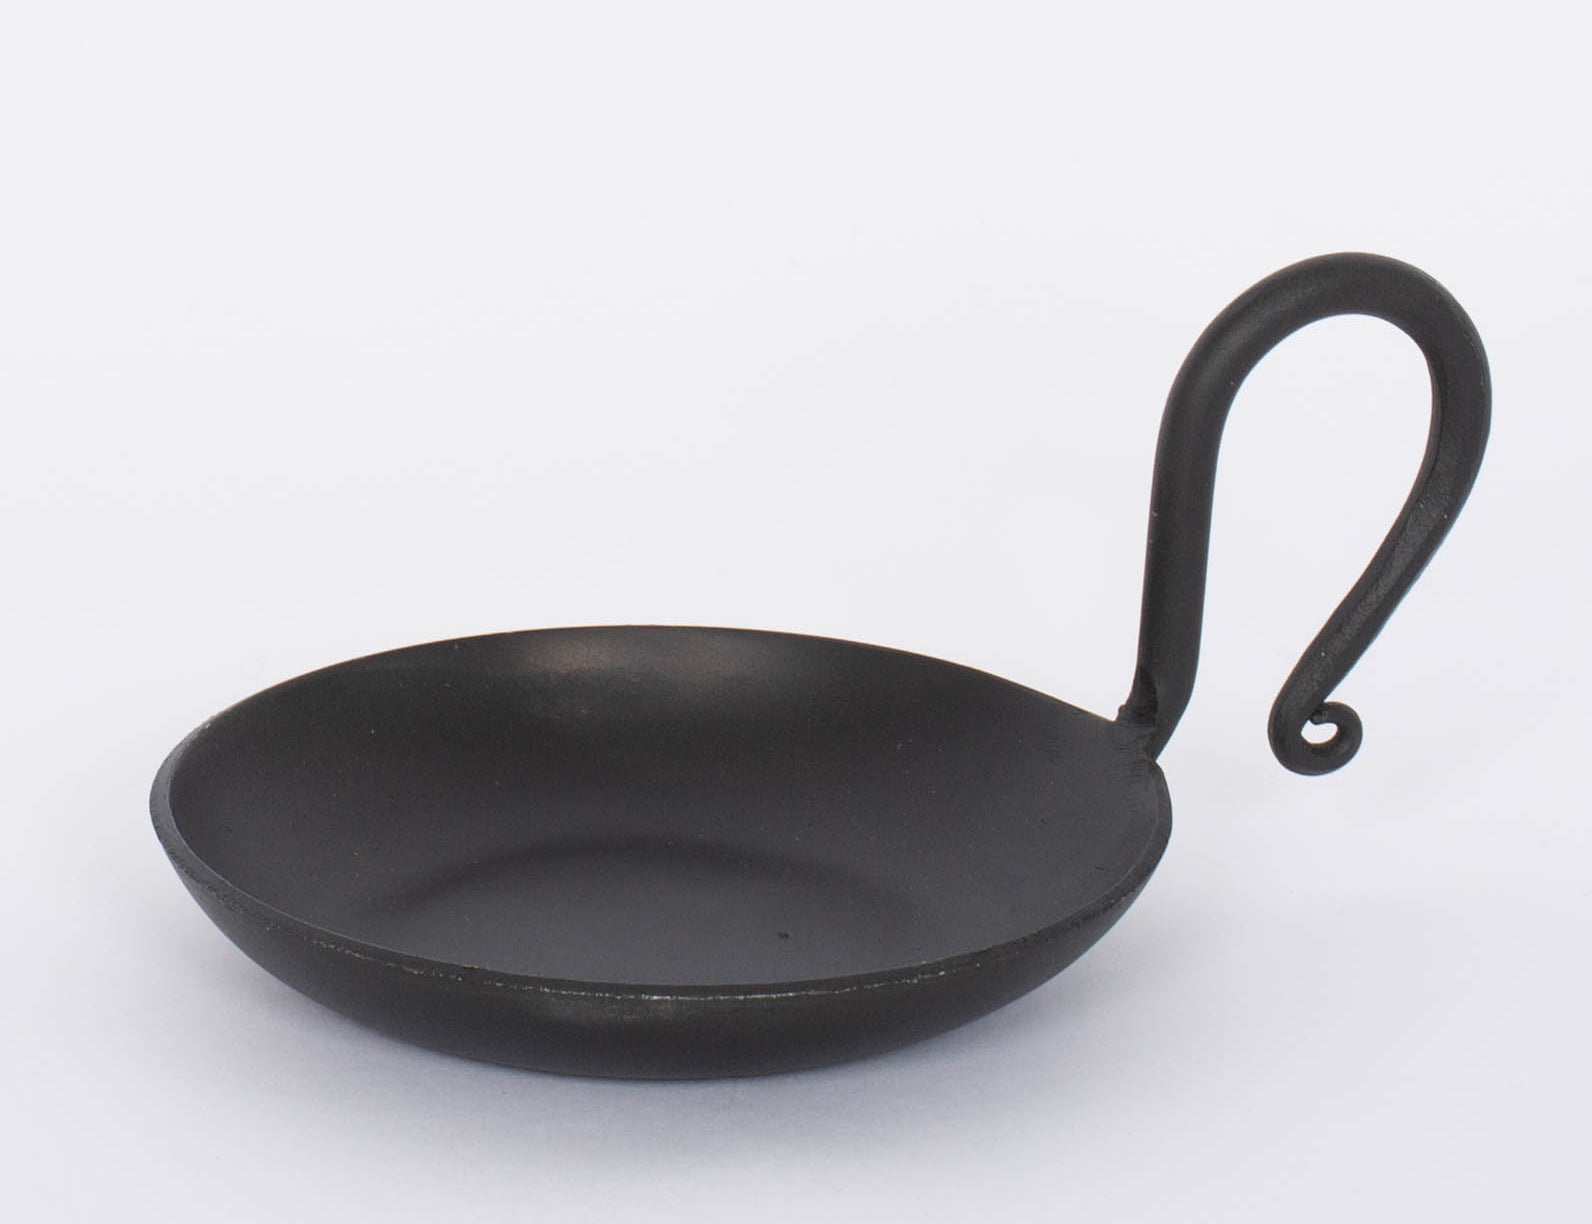 Handmade Forged Cast Iron Serving Dish with black matte finish and thin curving handle.  White background.